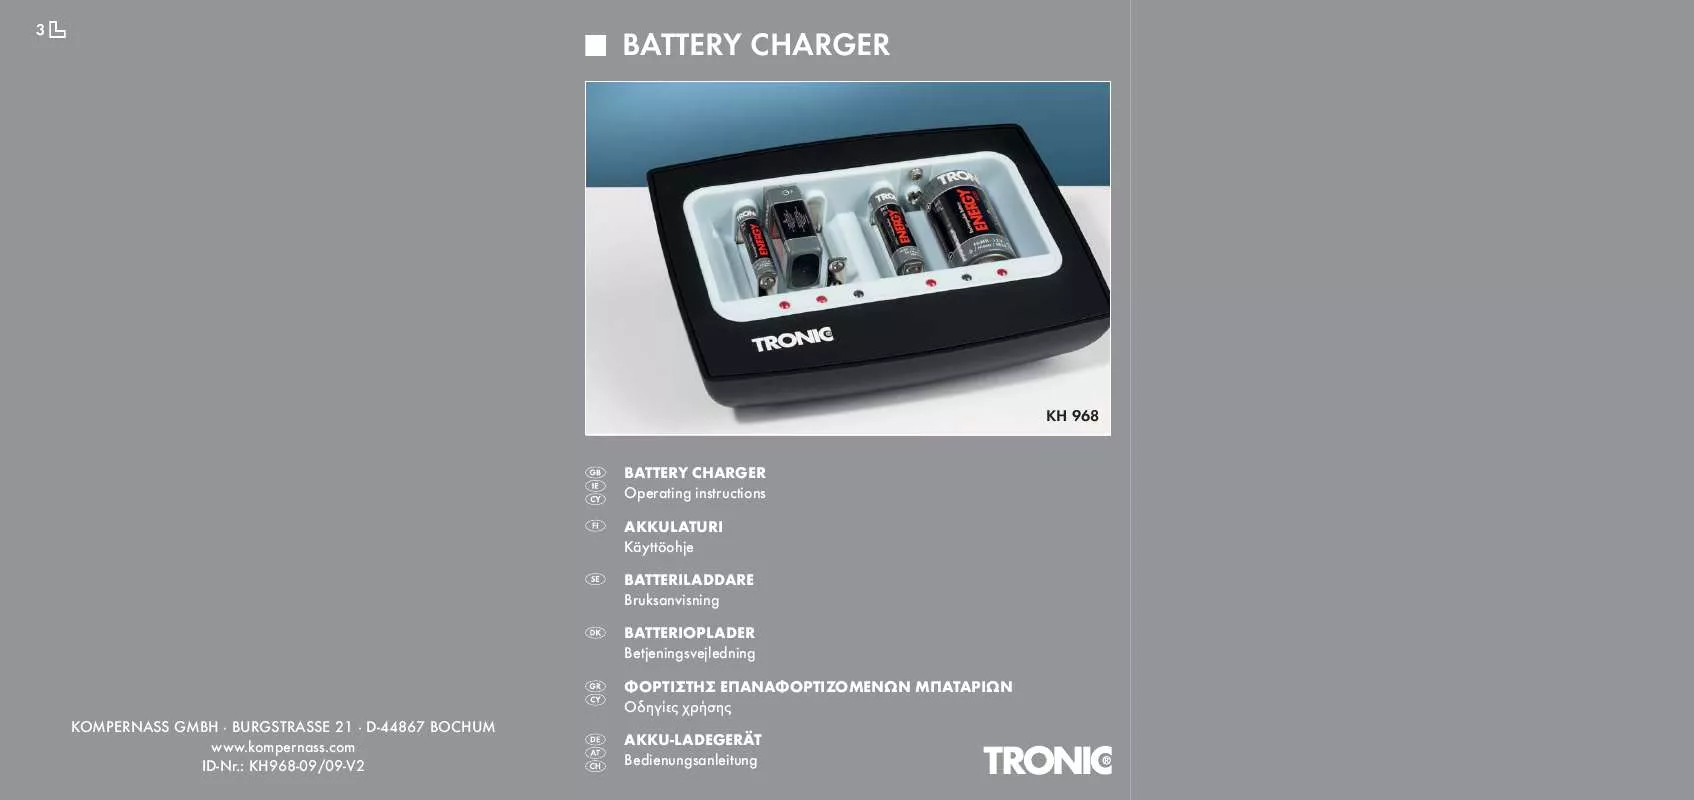 Mode d'emploi TRONIC KH 968 BATTERY CHARGER